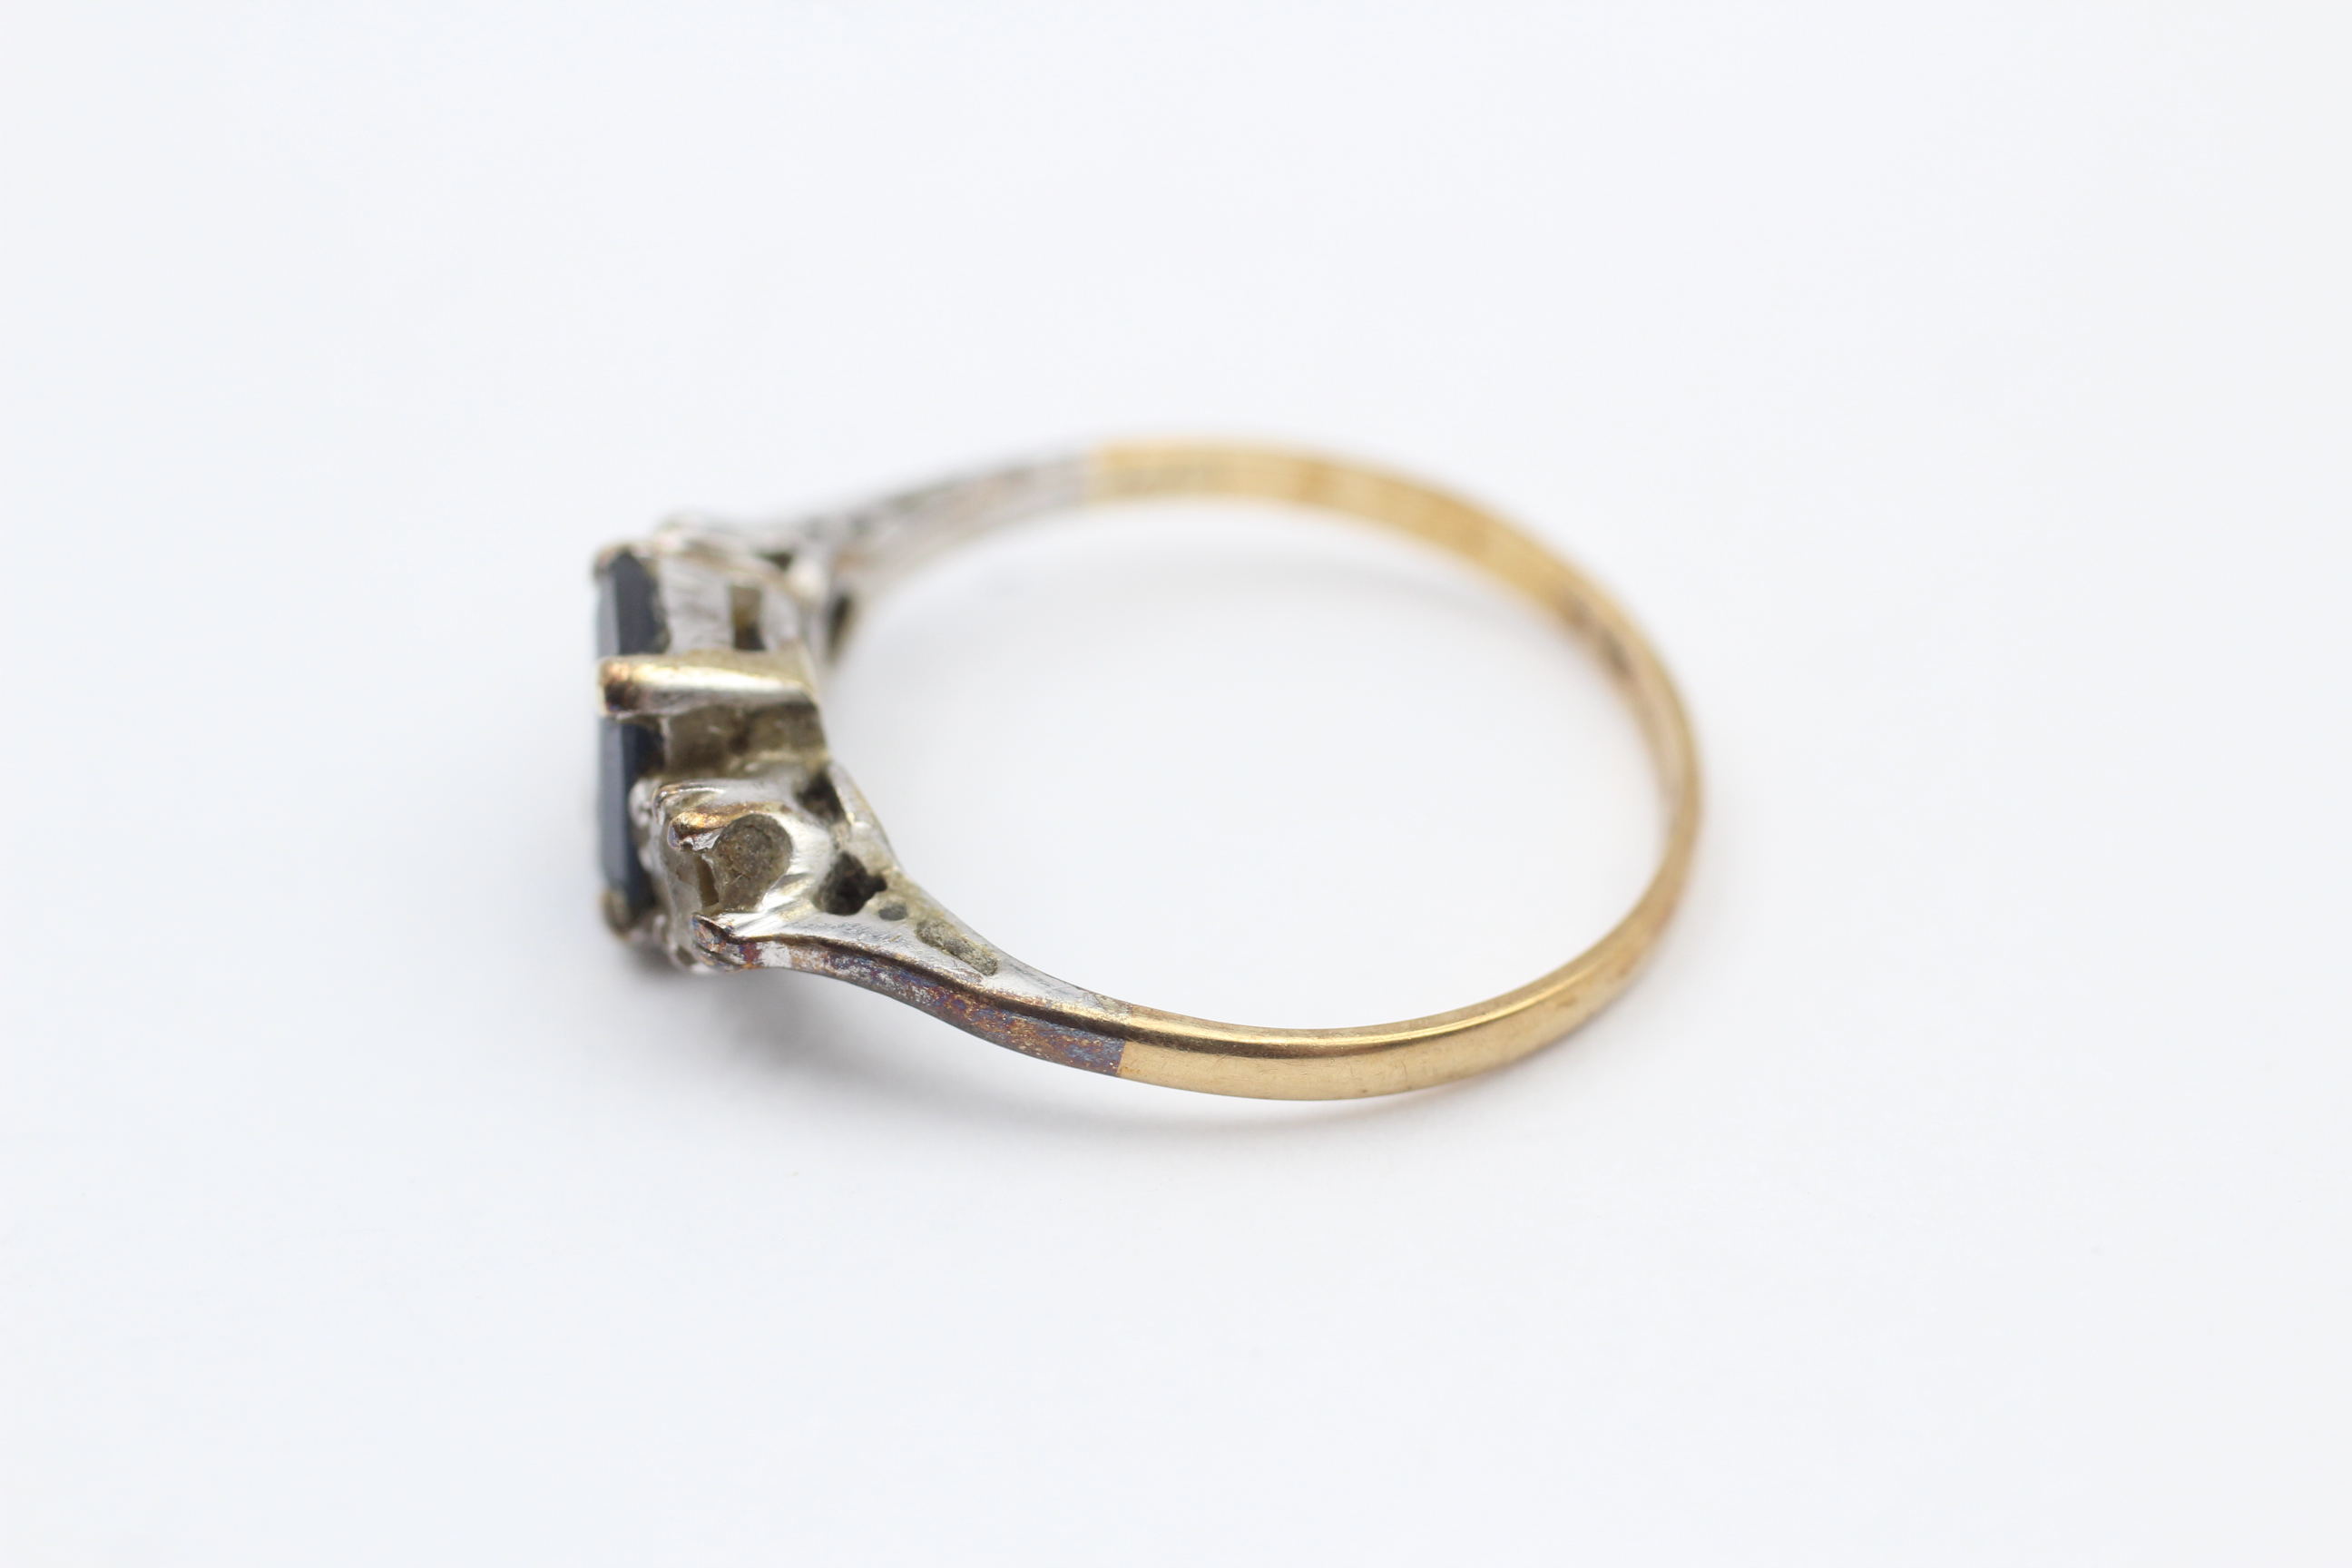 9ct Gold Sapphire & Paste Trilogy Dress Ring - Image 2 of 4